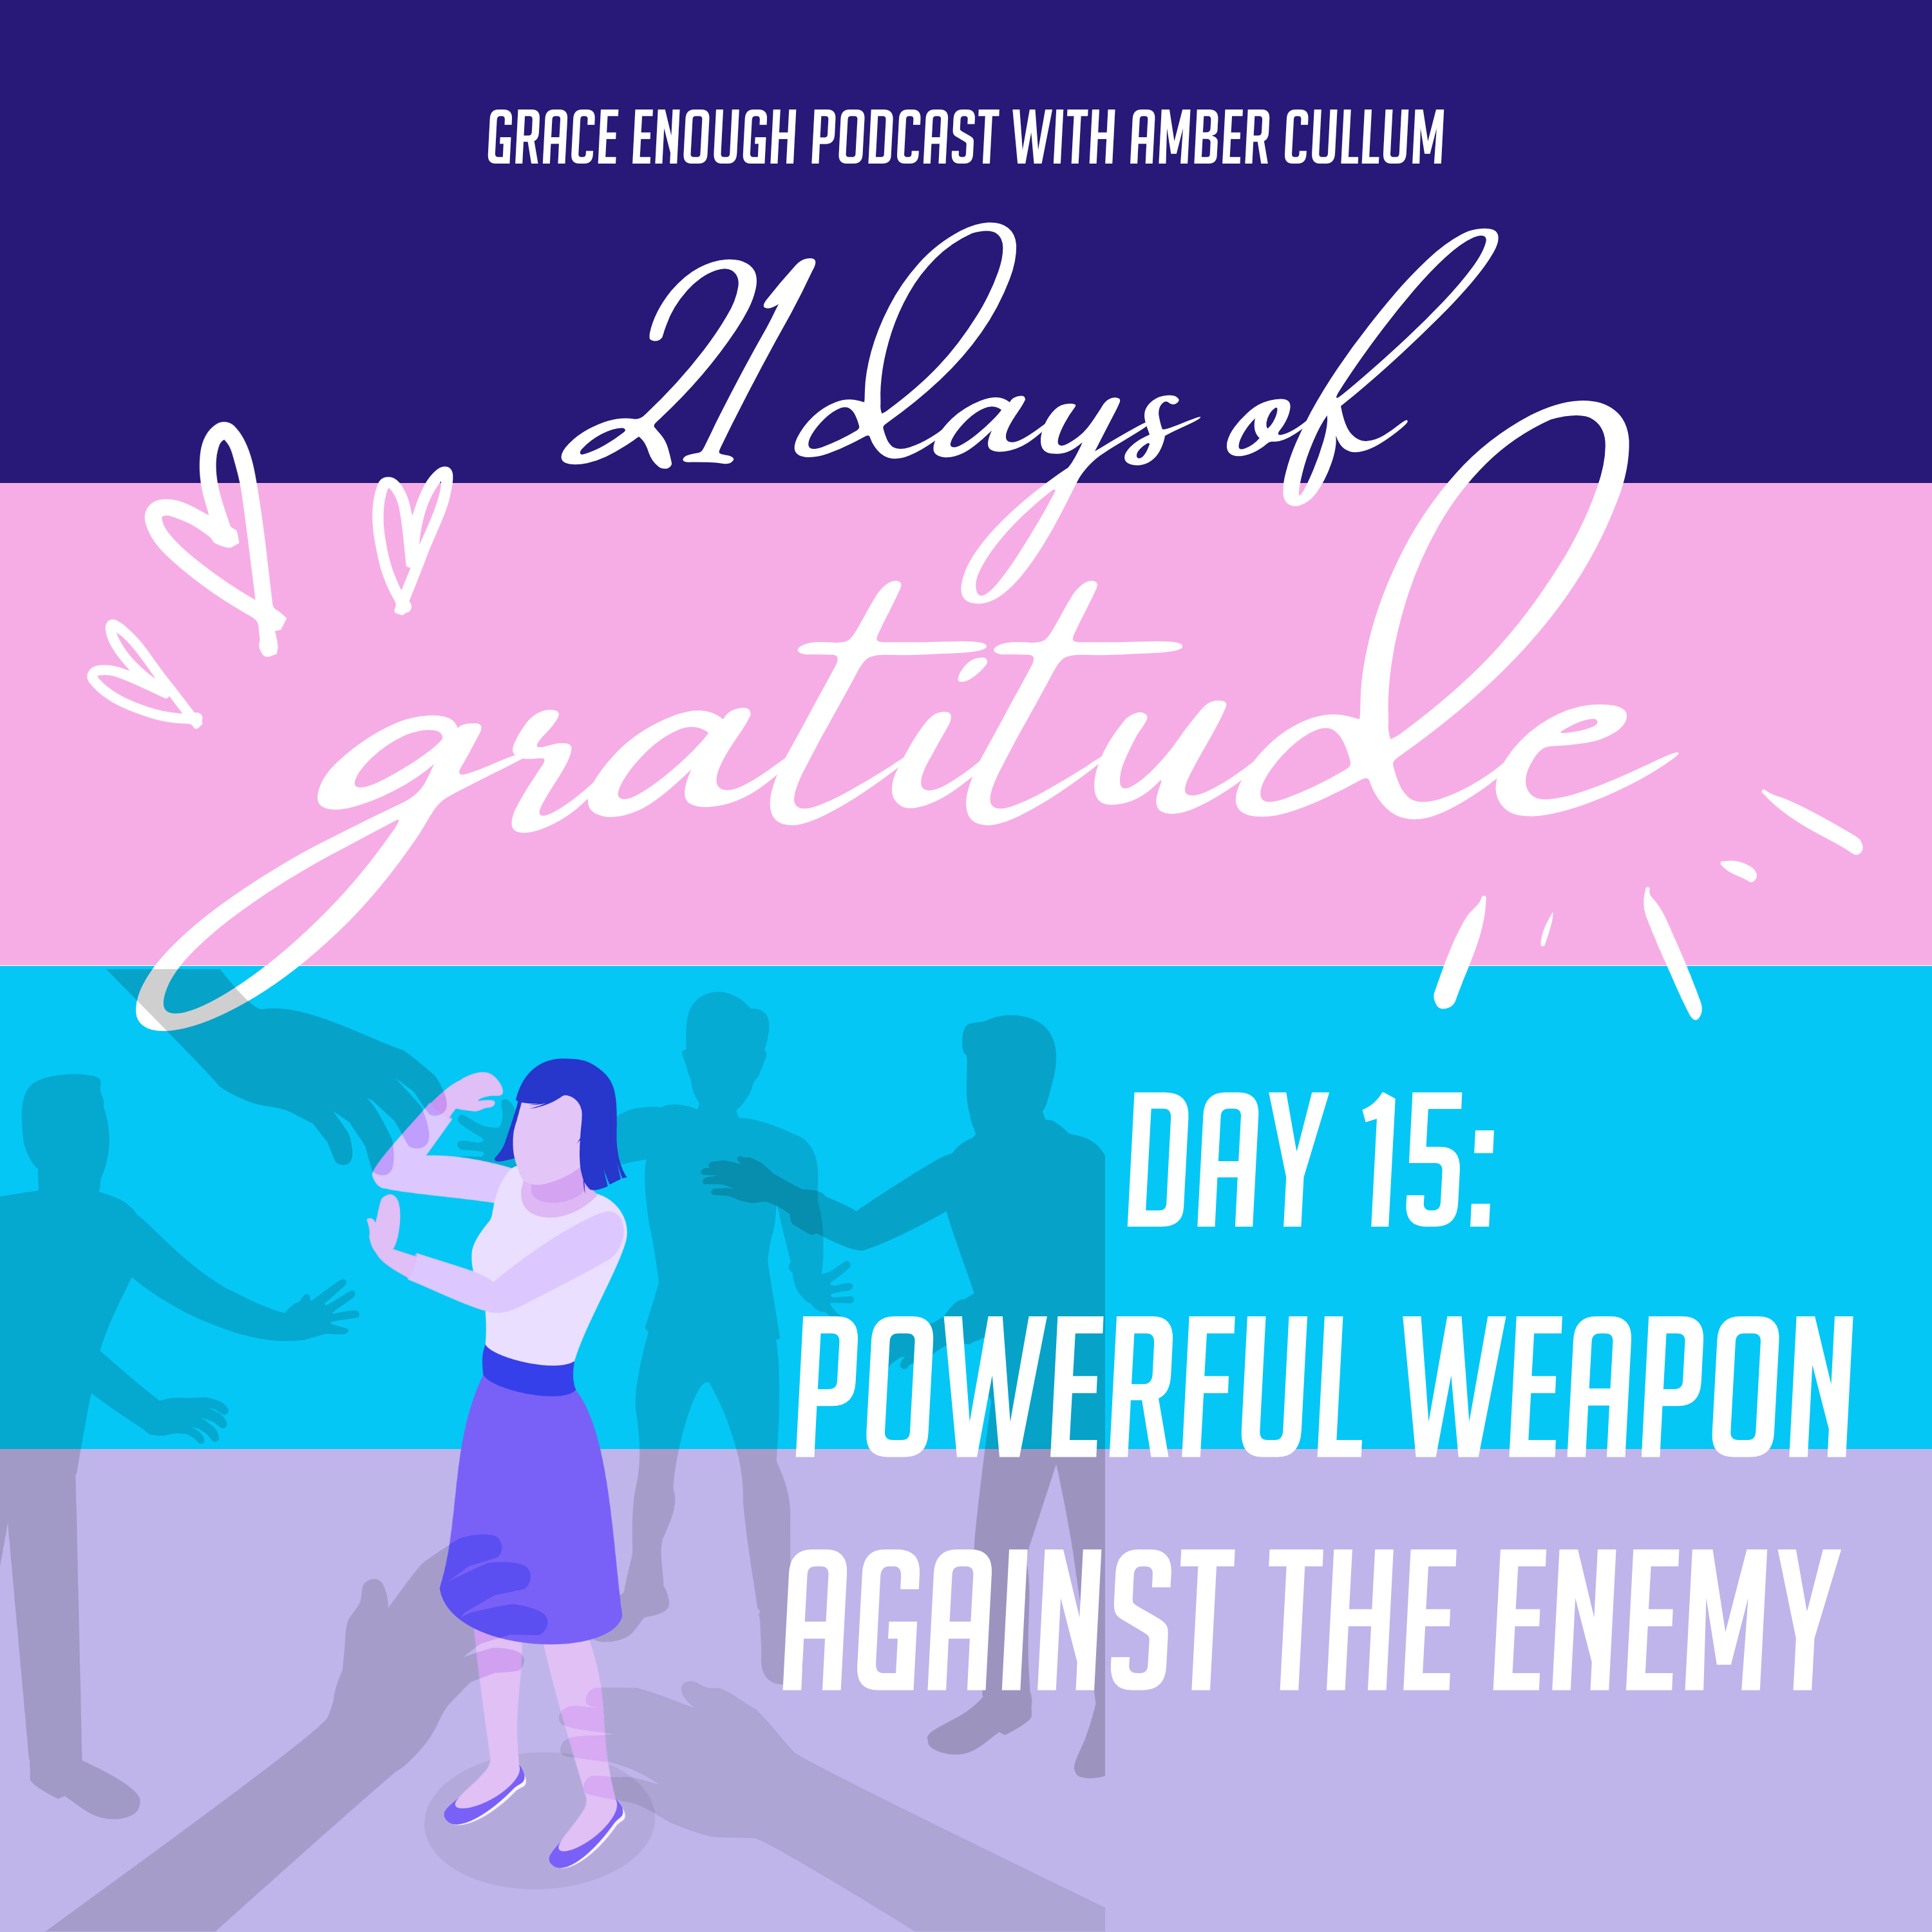 21 Days of Gratitude: Day 15, Powerful Weapon Against the Enemy